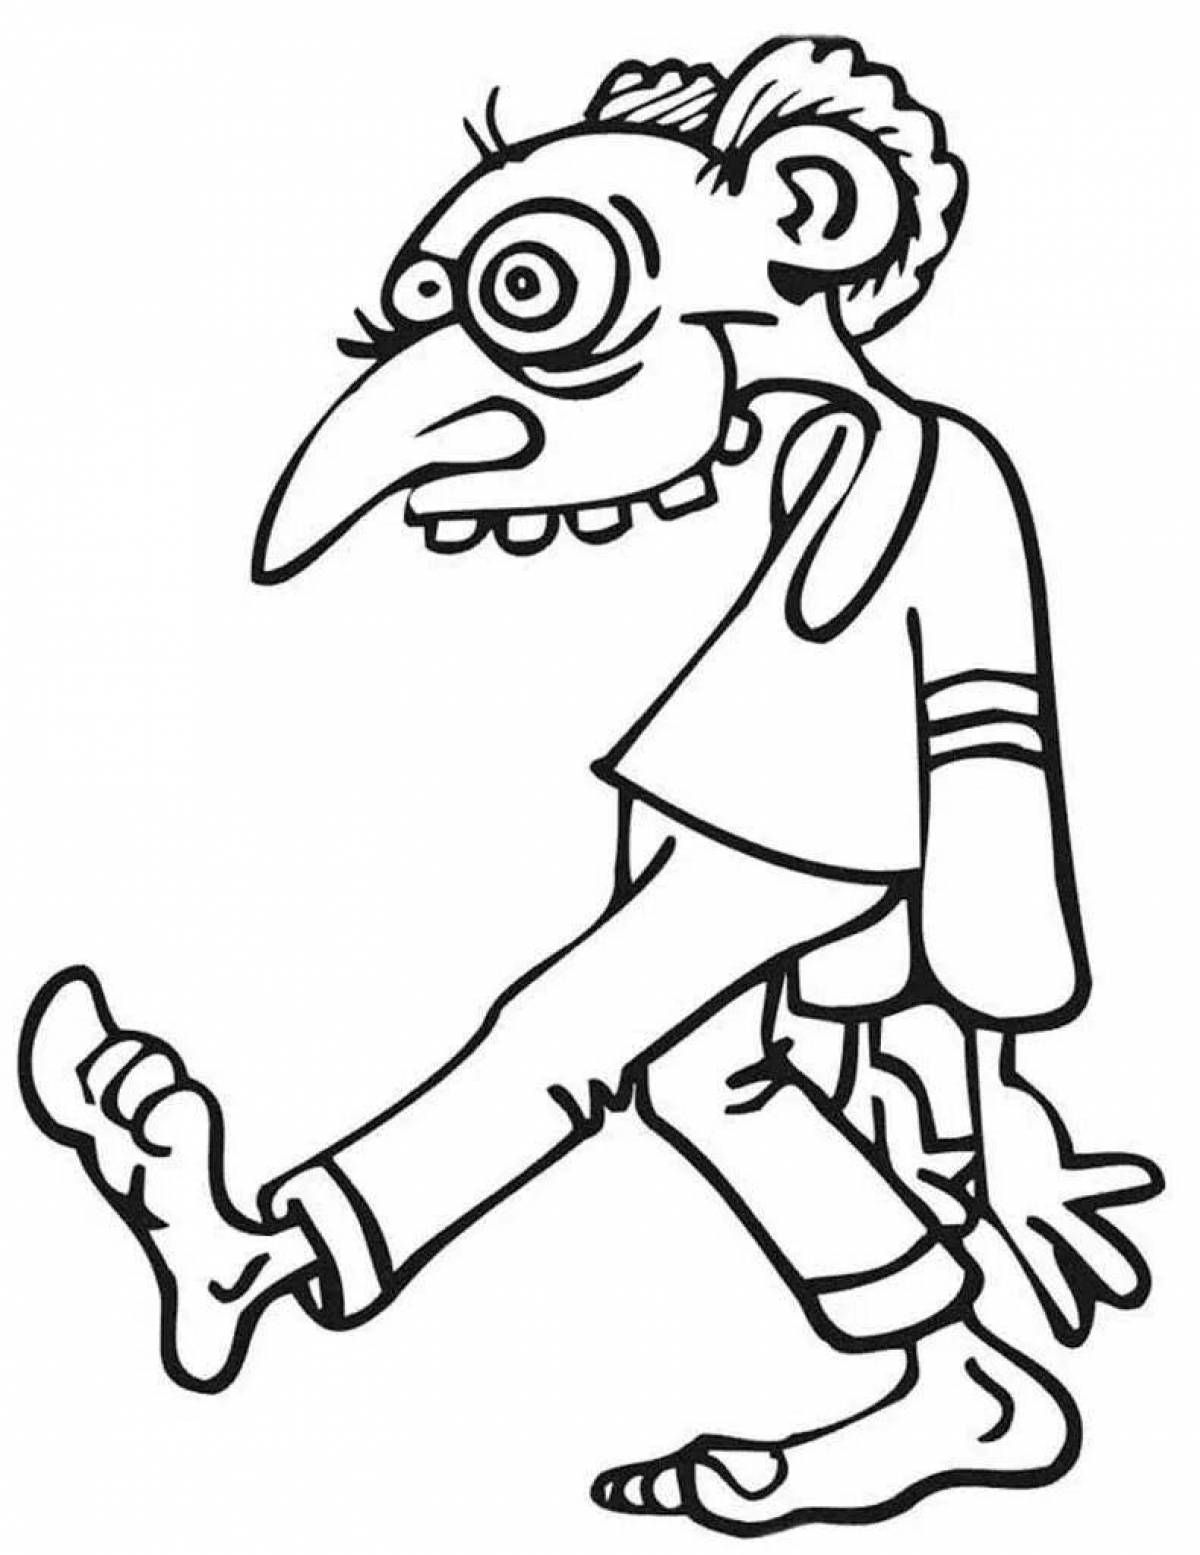 Amazing zombie coloring pages for kids